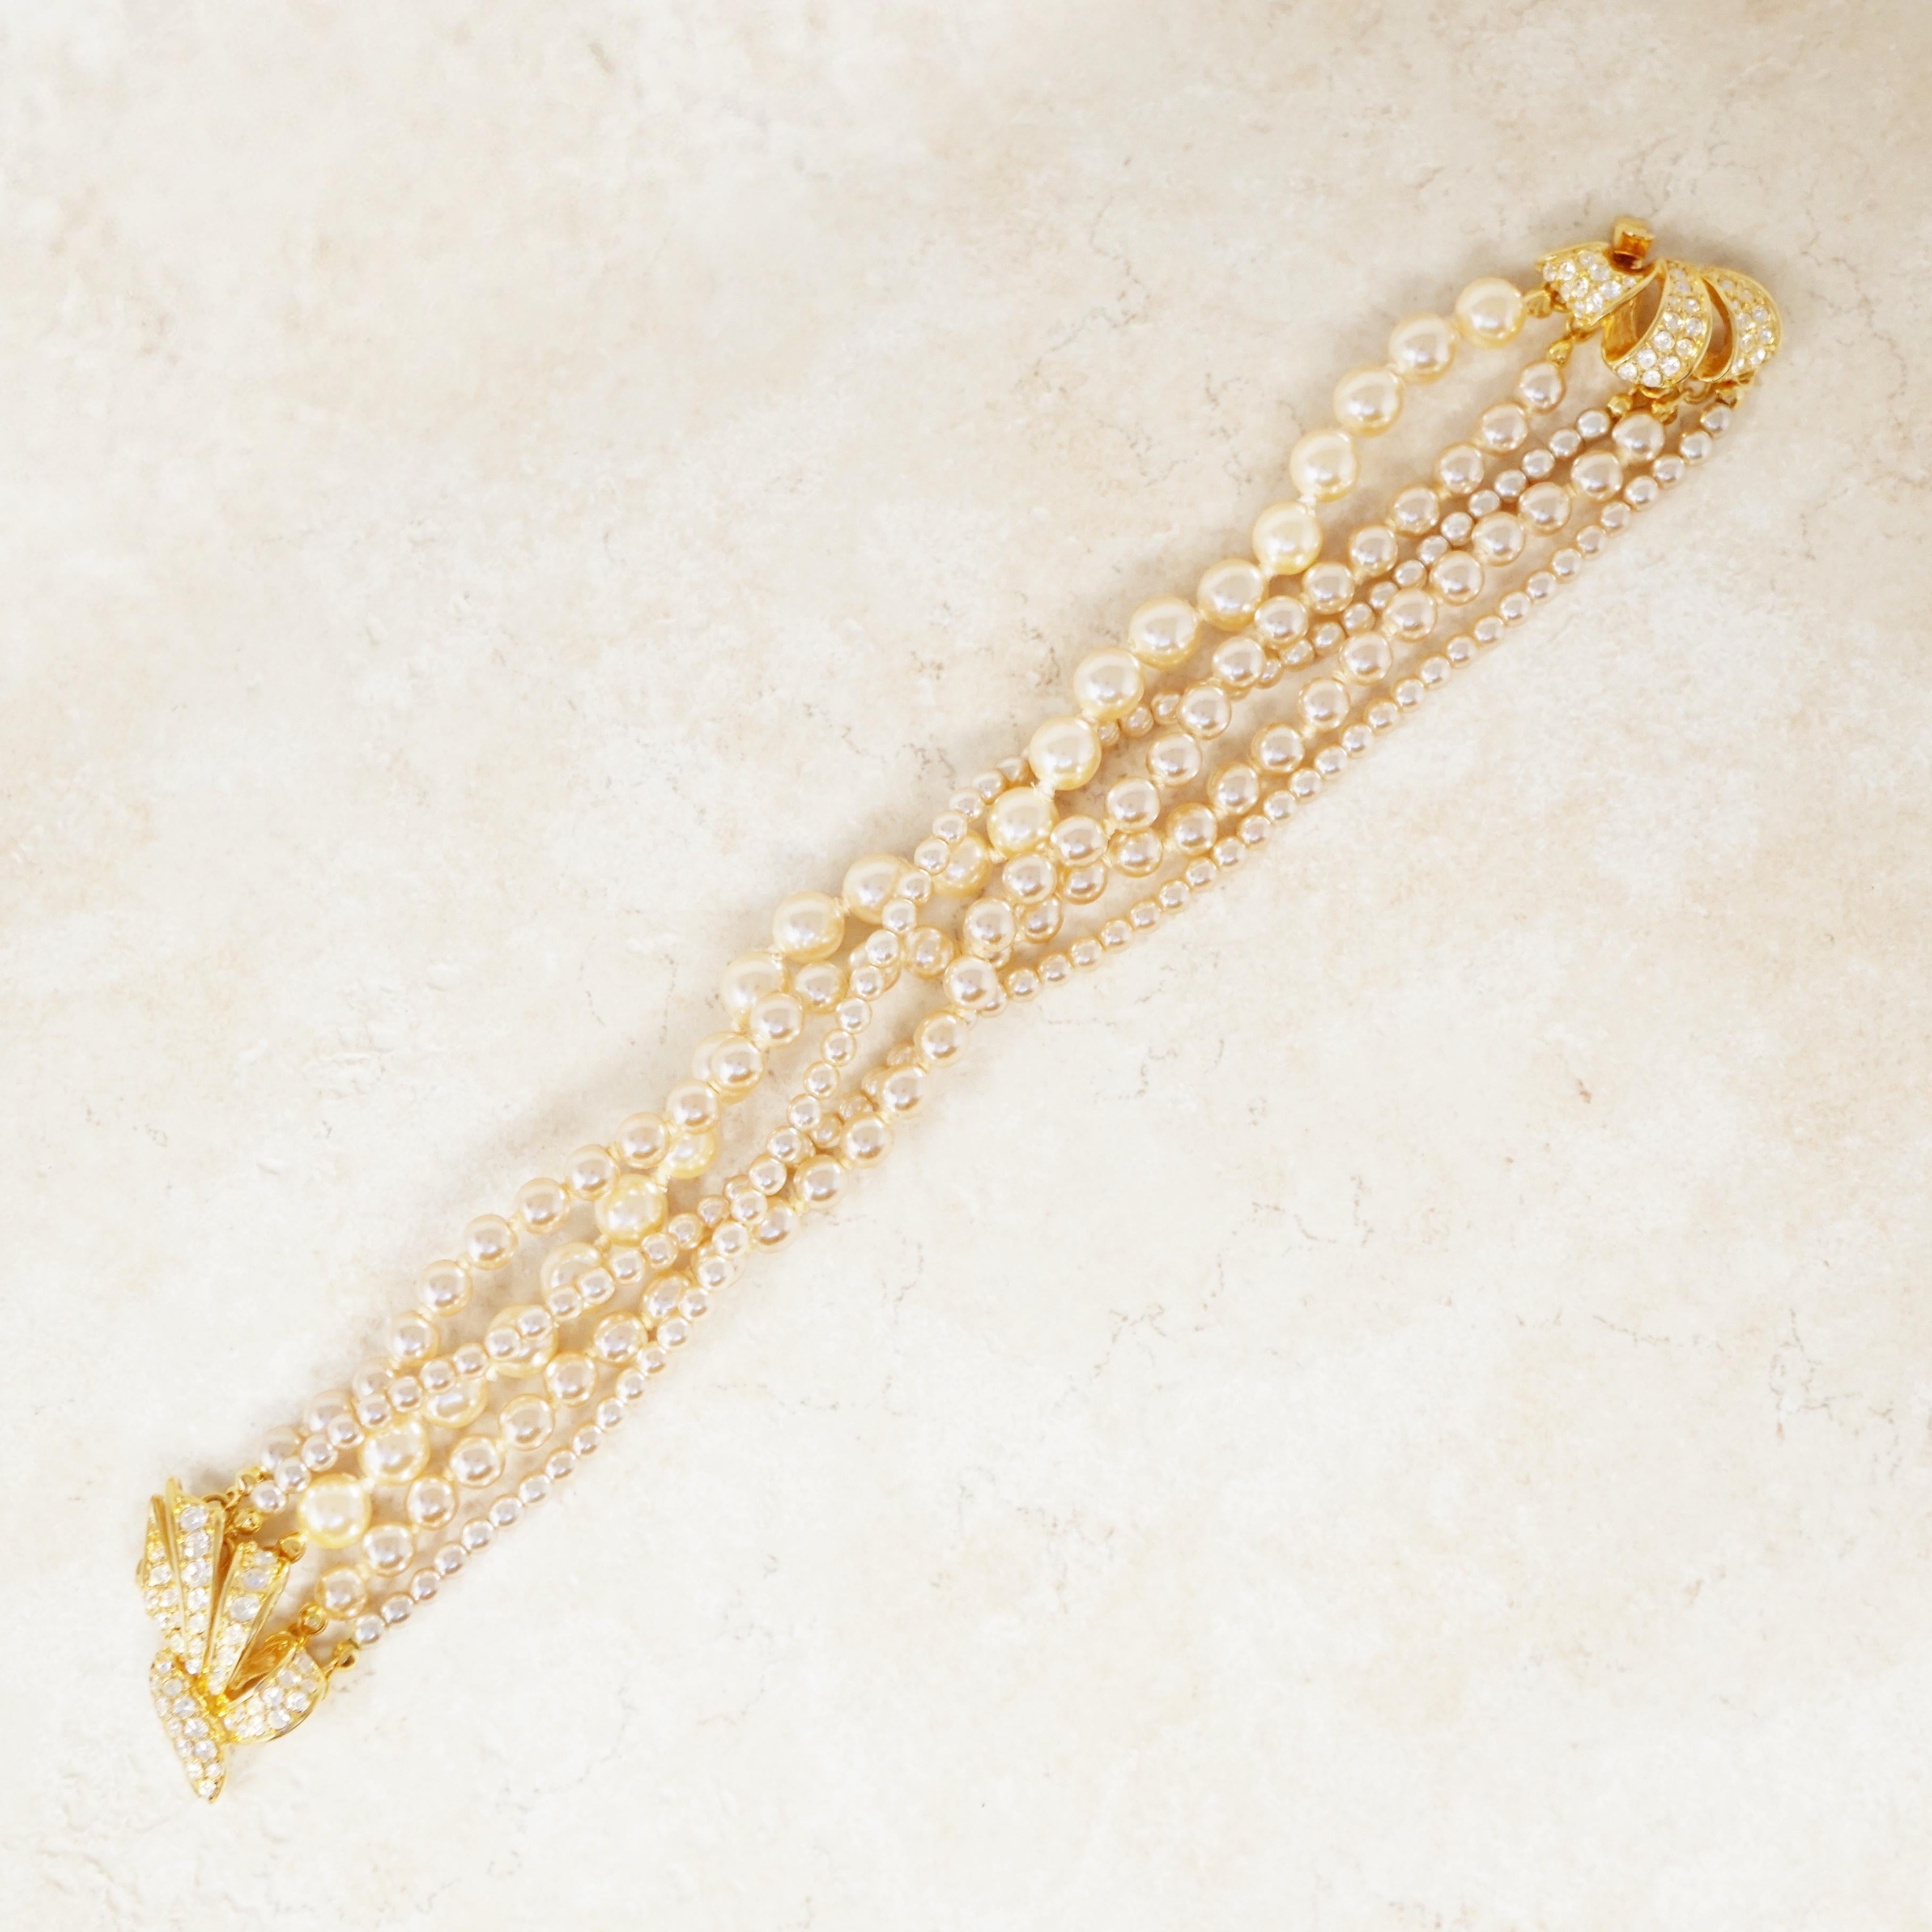 Five Strand Pearl Bracelet with Crystal Pavé Bow Clasp by Nolan Miller, 1980s 1